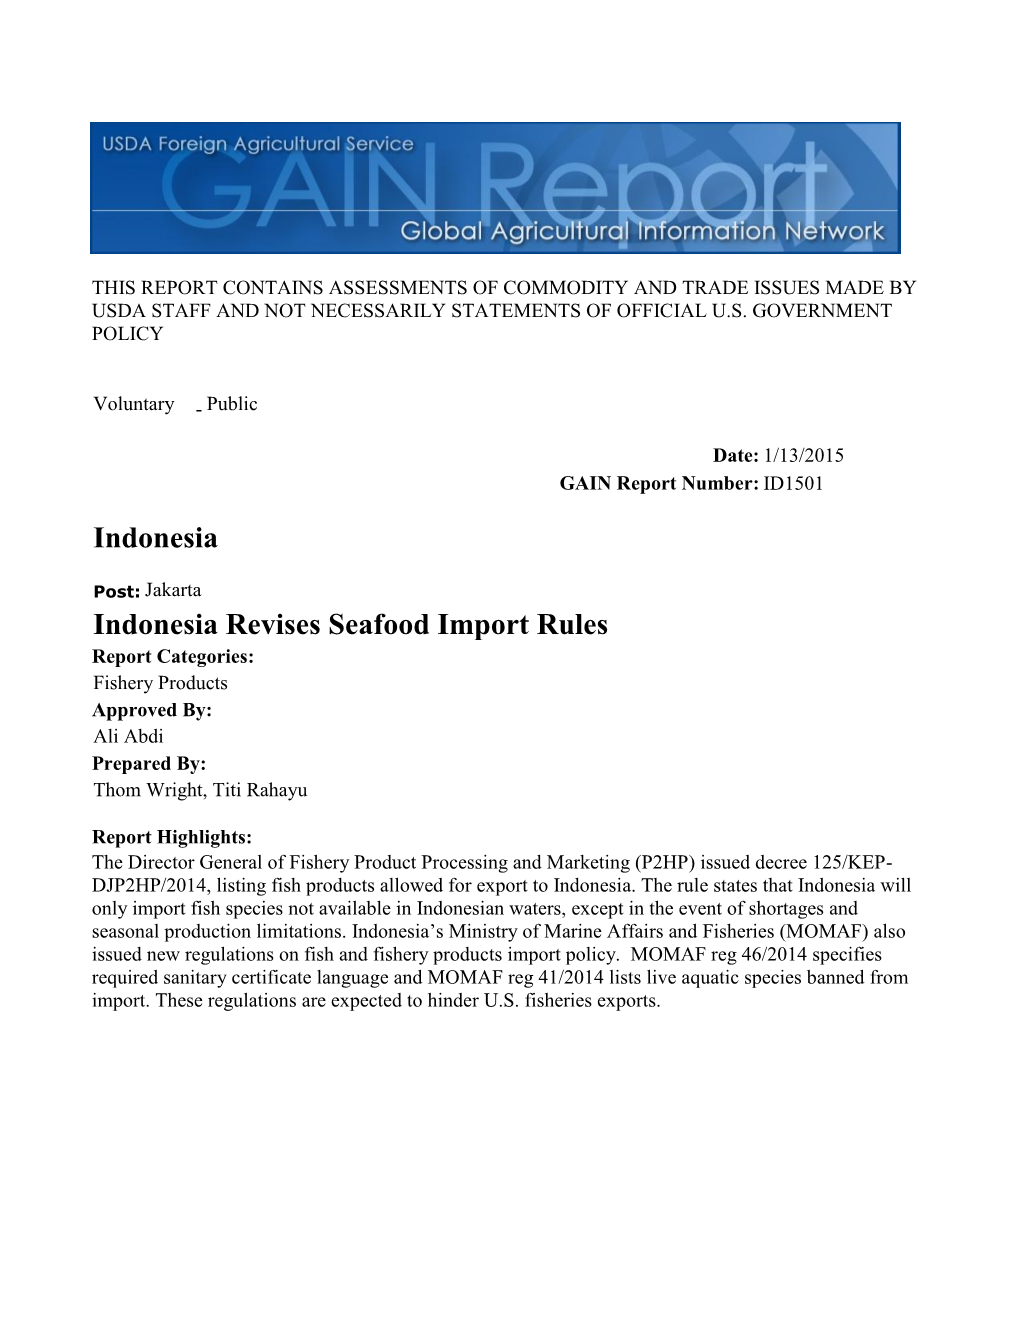 Indonesia Revises Seafood Import Rules Report Categories: Fishery Products Approved By: Ali Abdi Prepared By: Thom Wright, Titi Rahayu